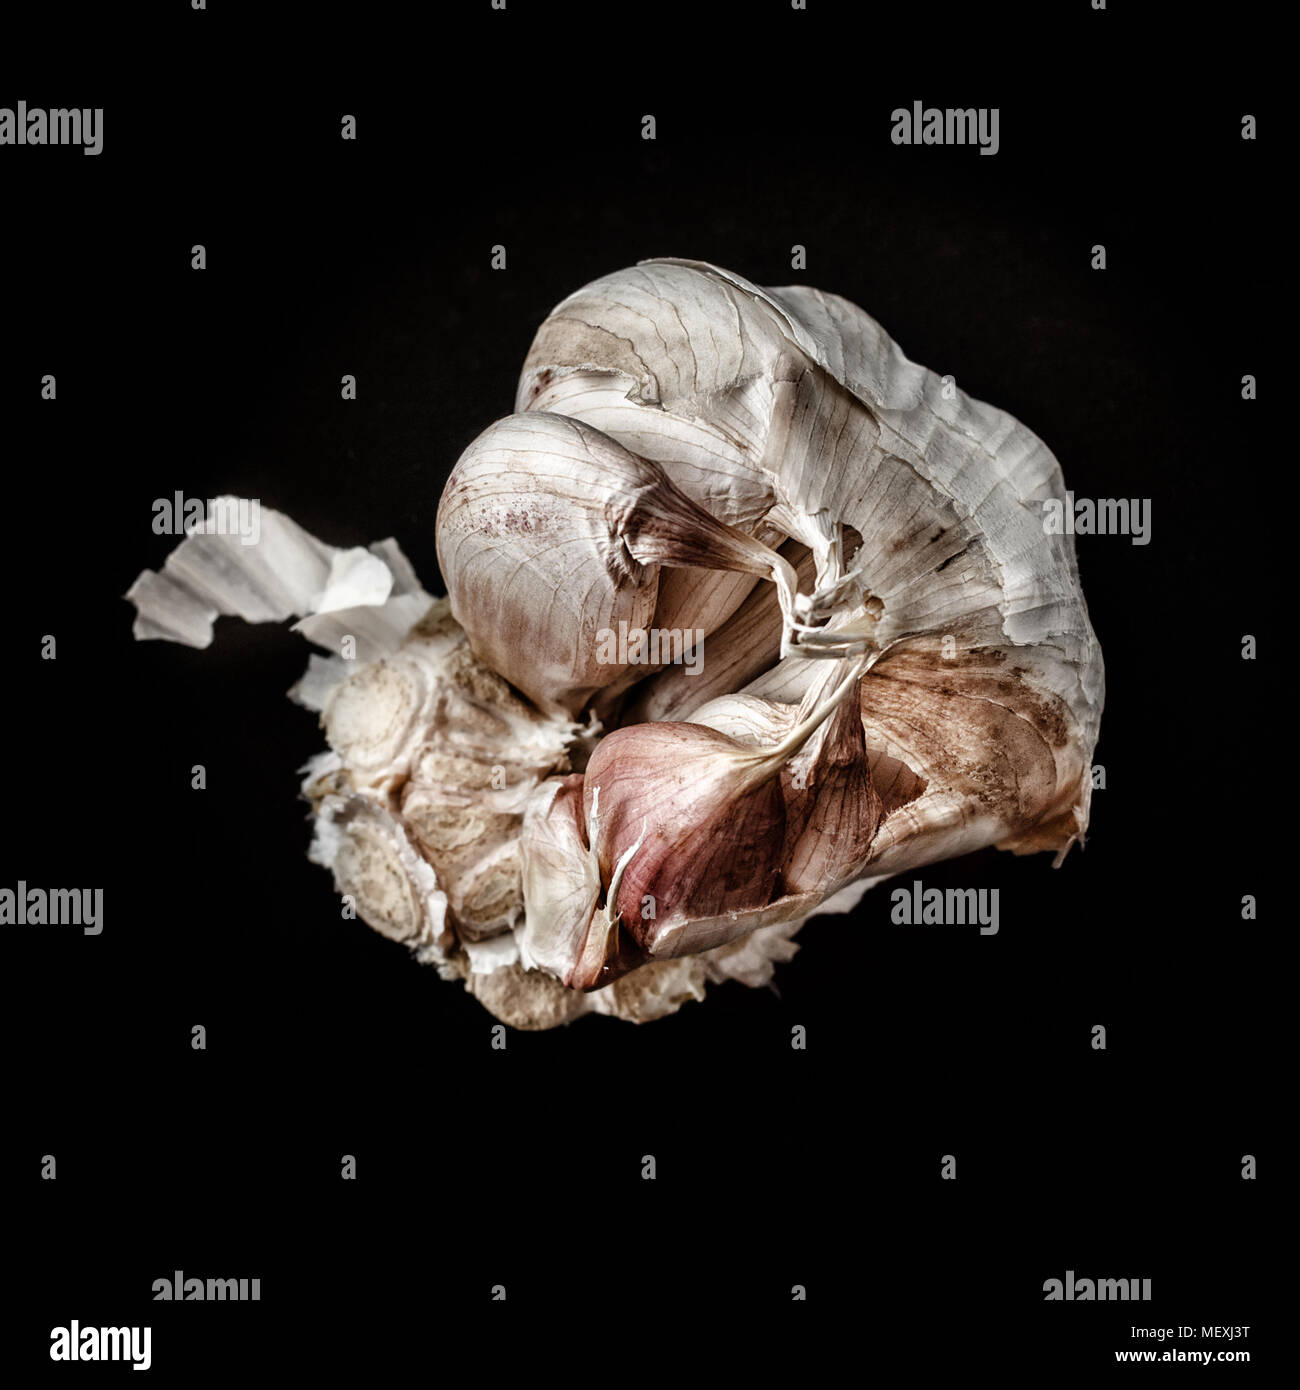 Garlic head in rustic style on black background. Square image Stock Photo